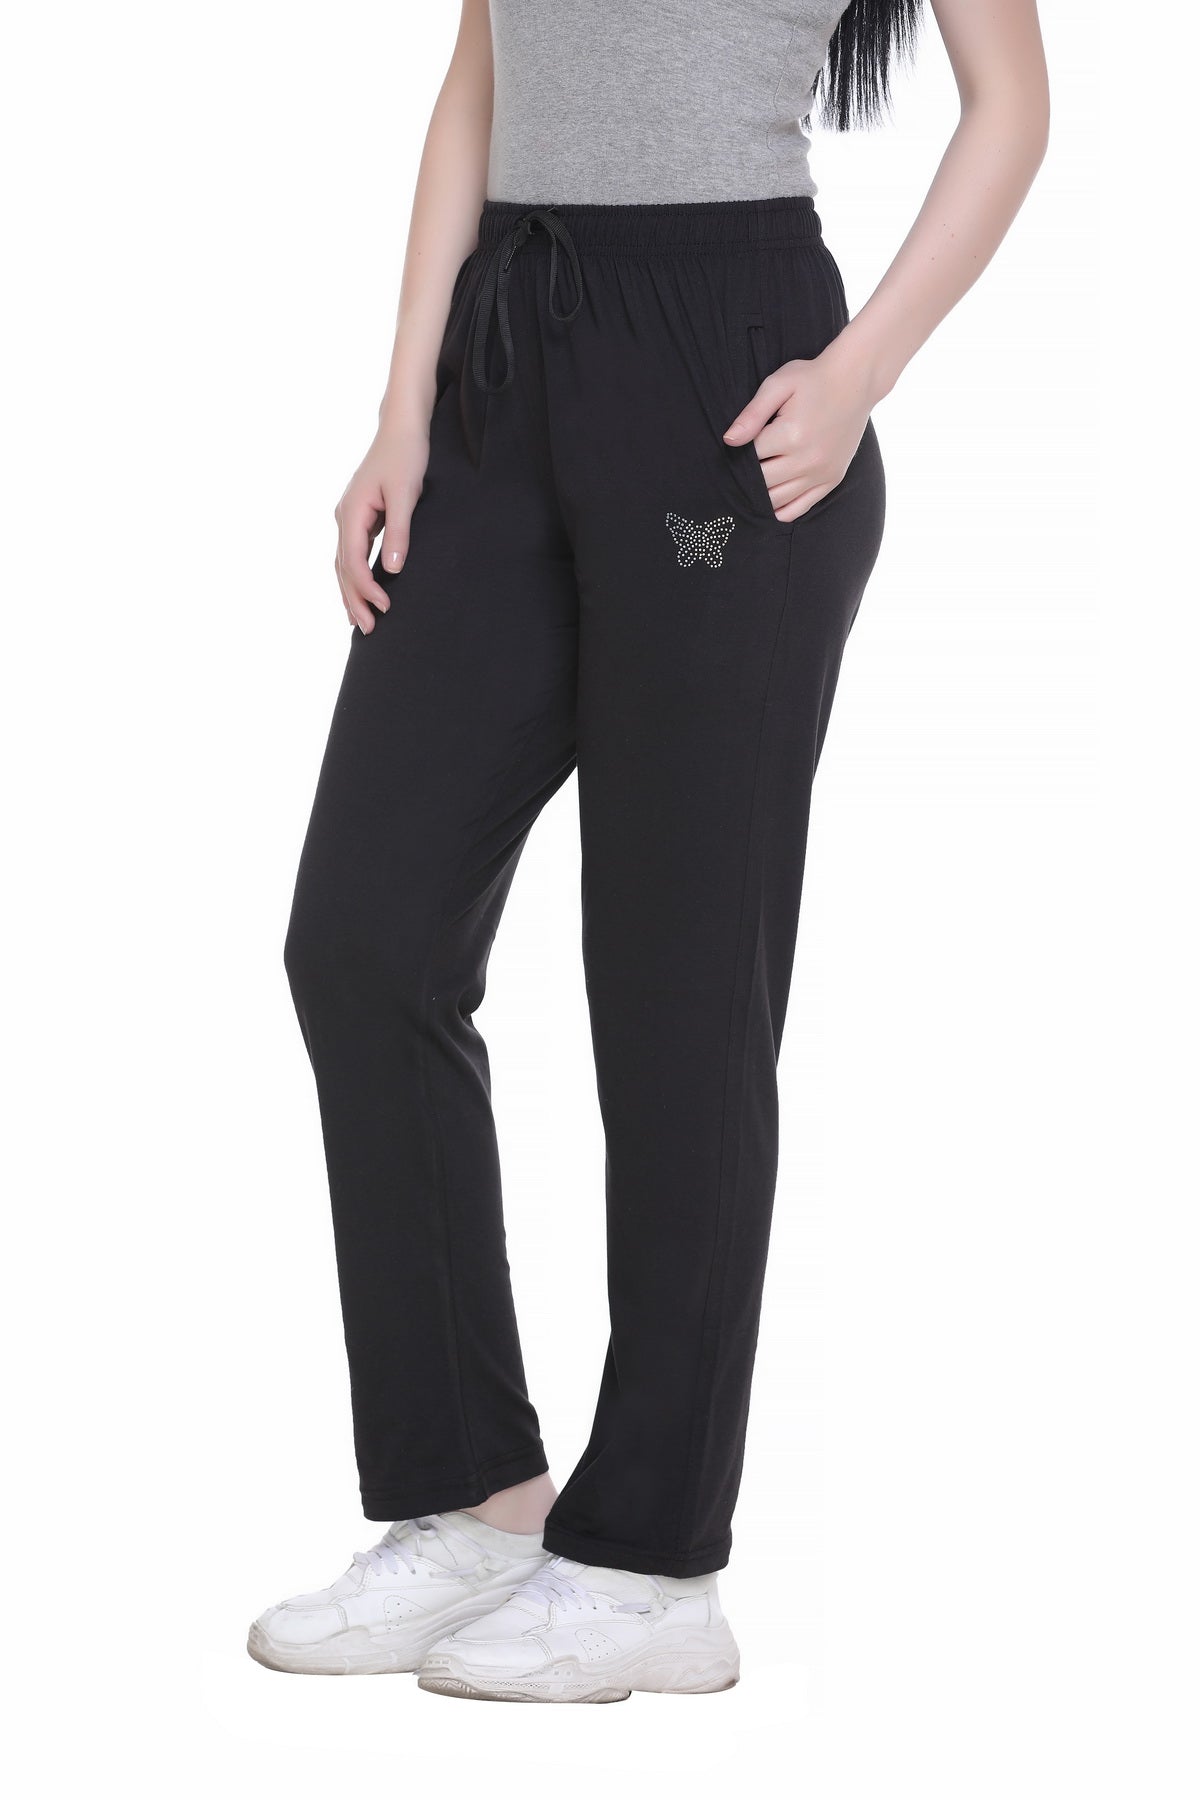 spykar MKTGYM01AI10Black Cotton Low Rise Gym Jeans Fit Knit Track Pants  (Black) in Kanpur at best price by The Body Lauggauge - Justdial